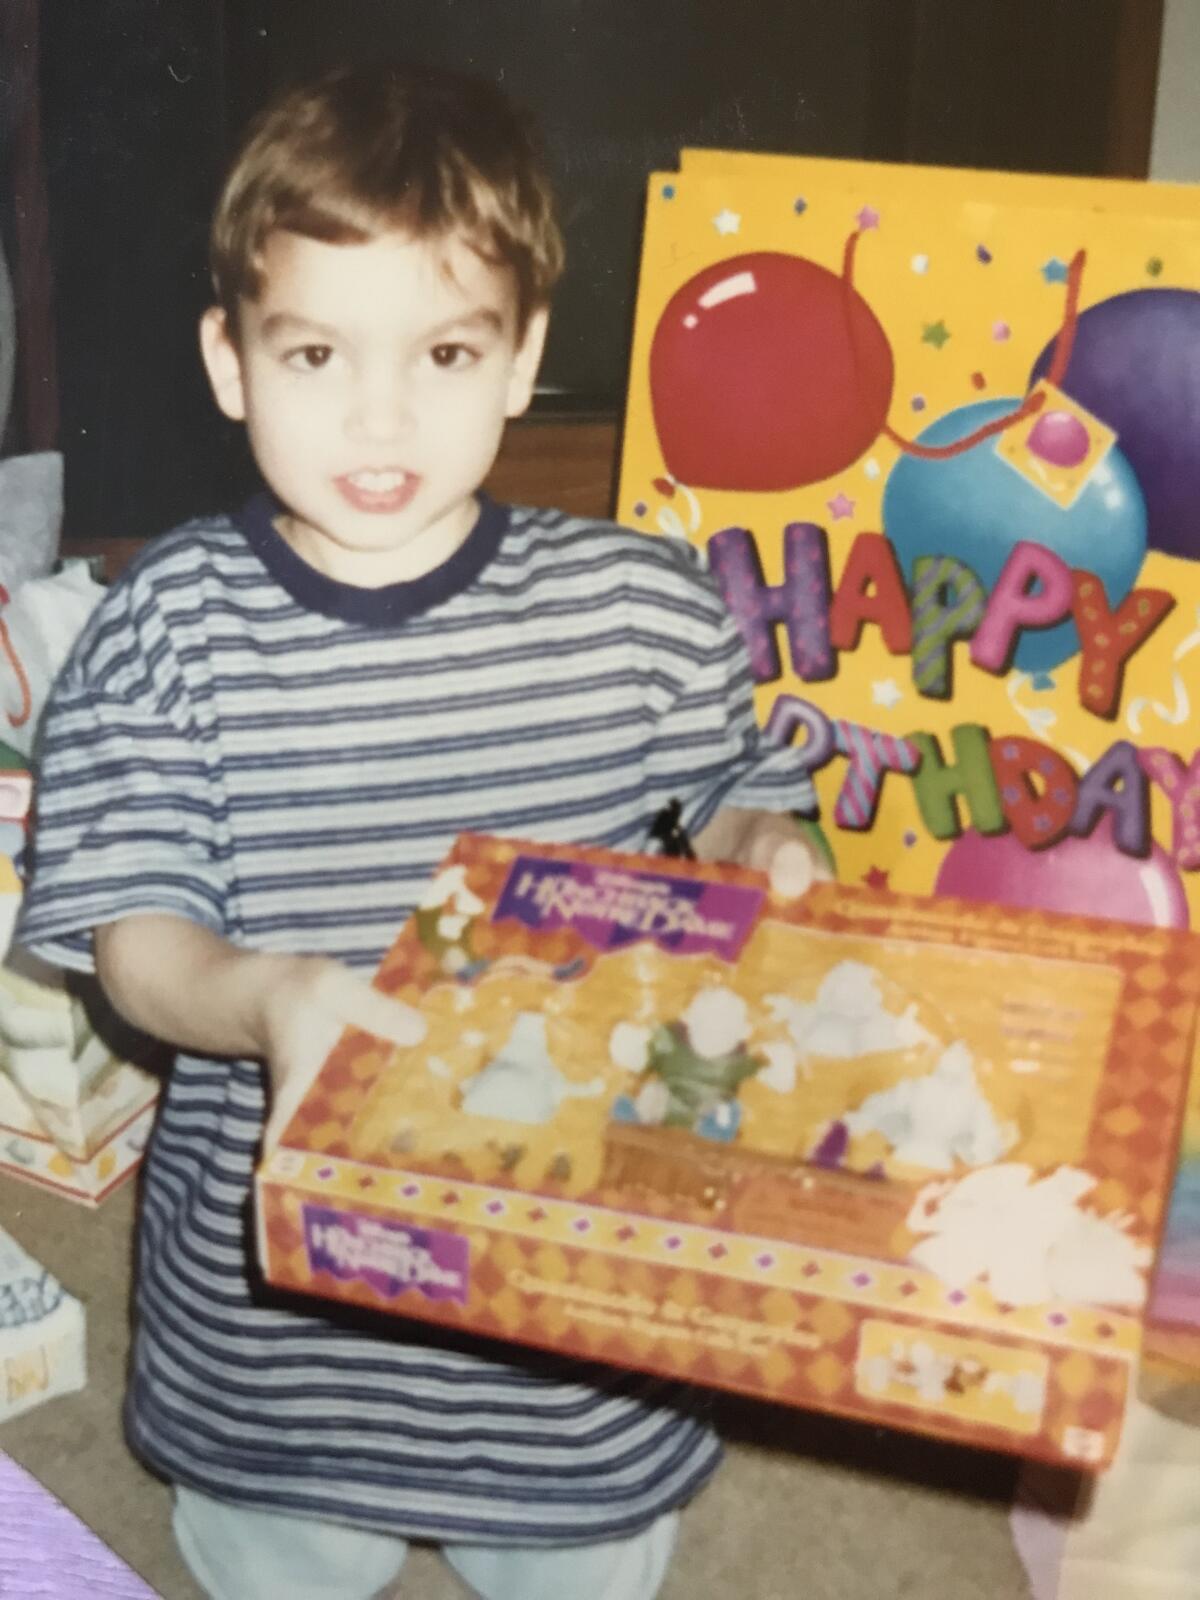 A boy holds a gift in a birthday photo